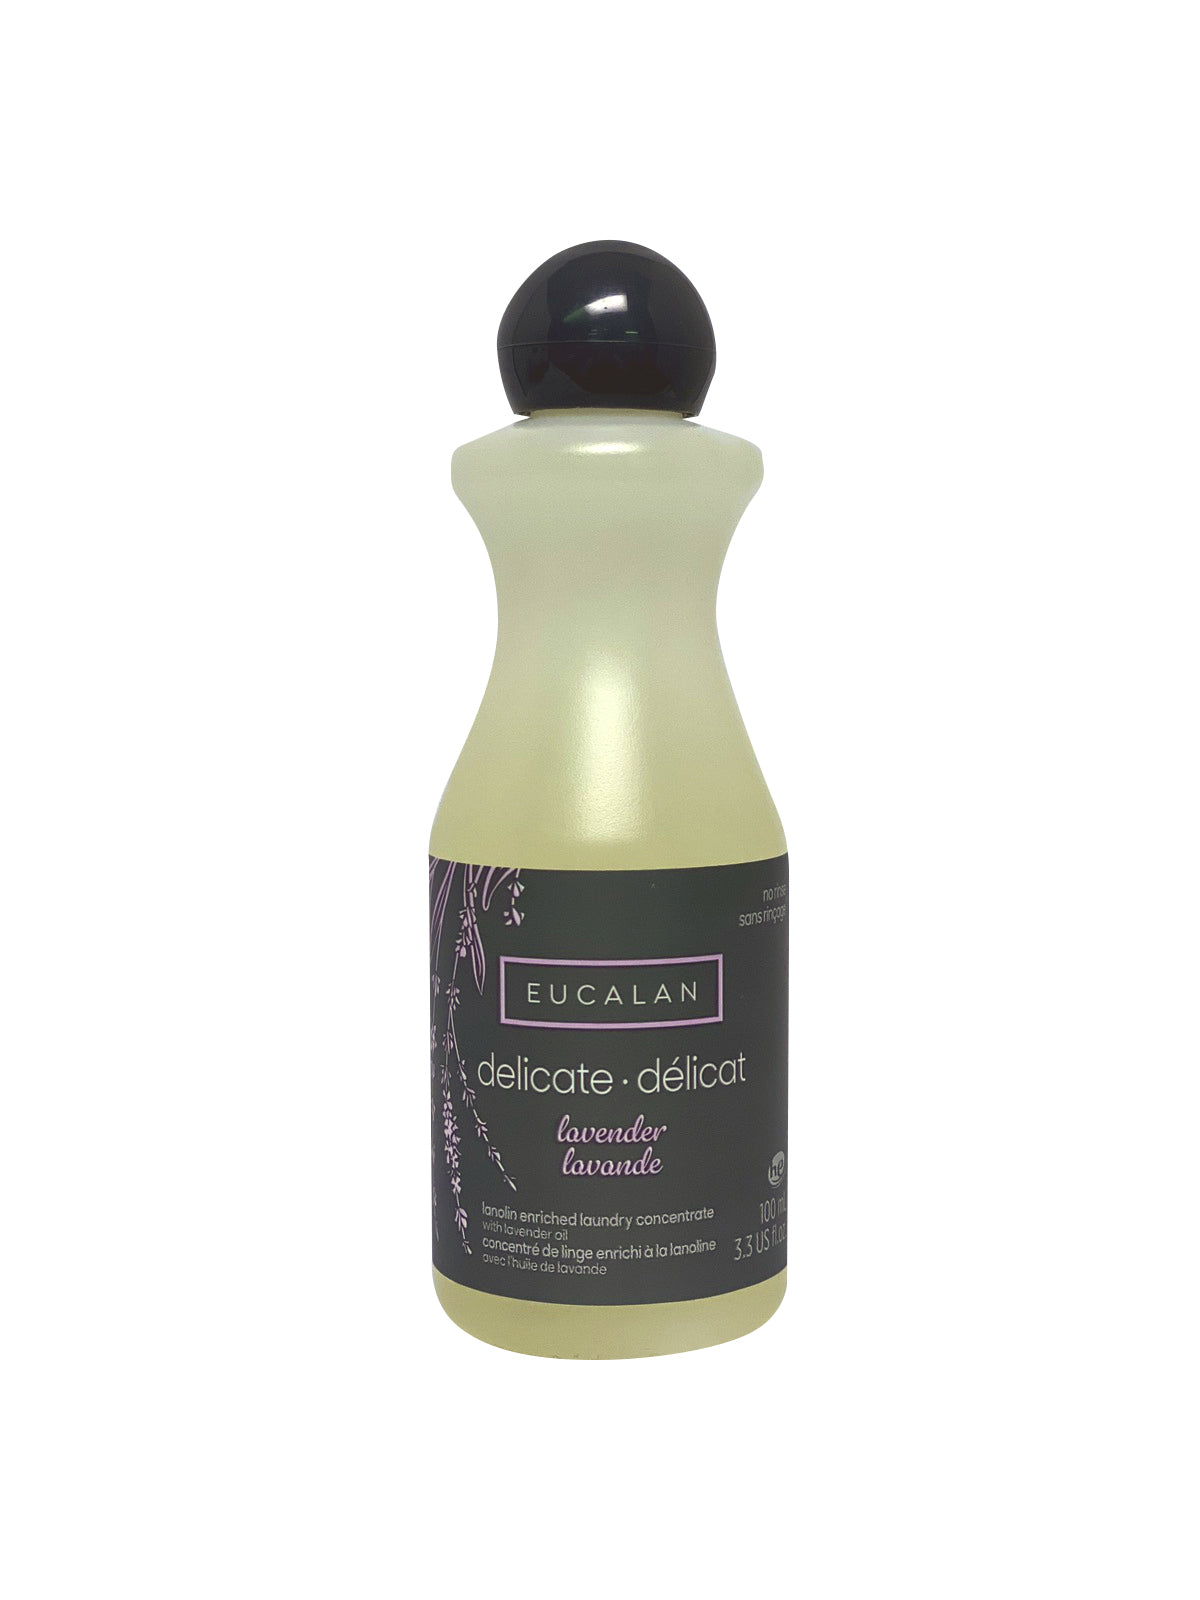 3.3 ounce bottle of Eucalan Lavender for 20 washes